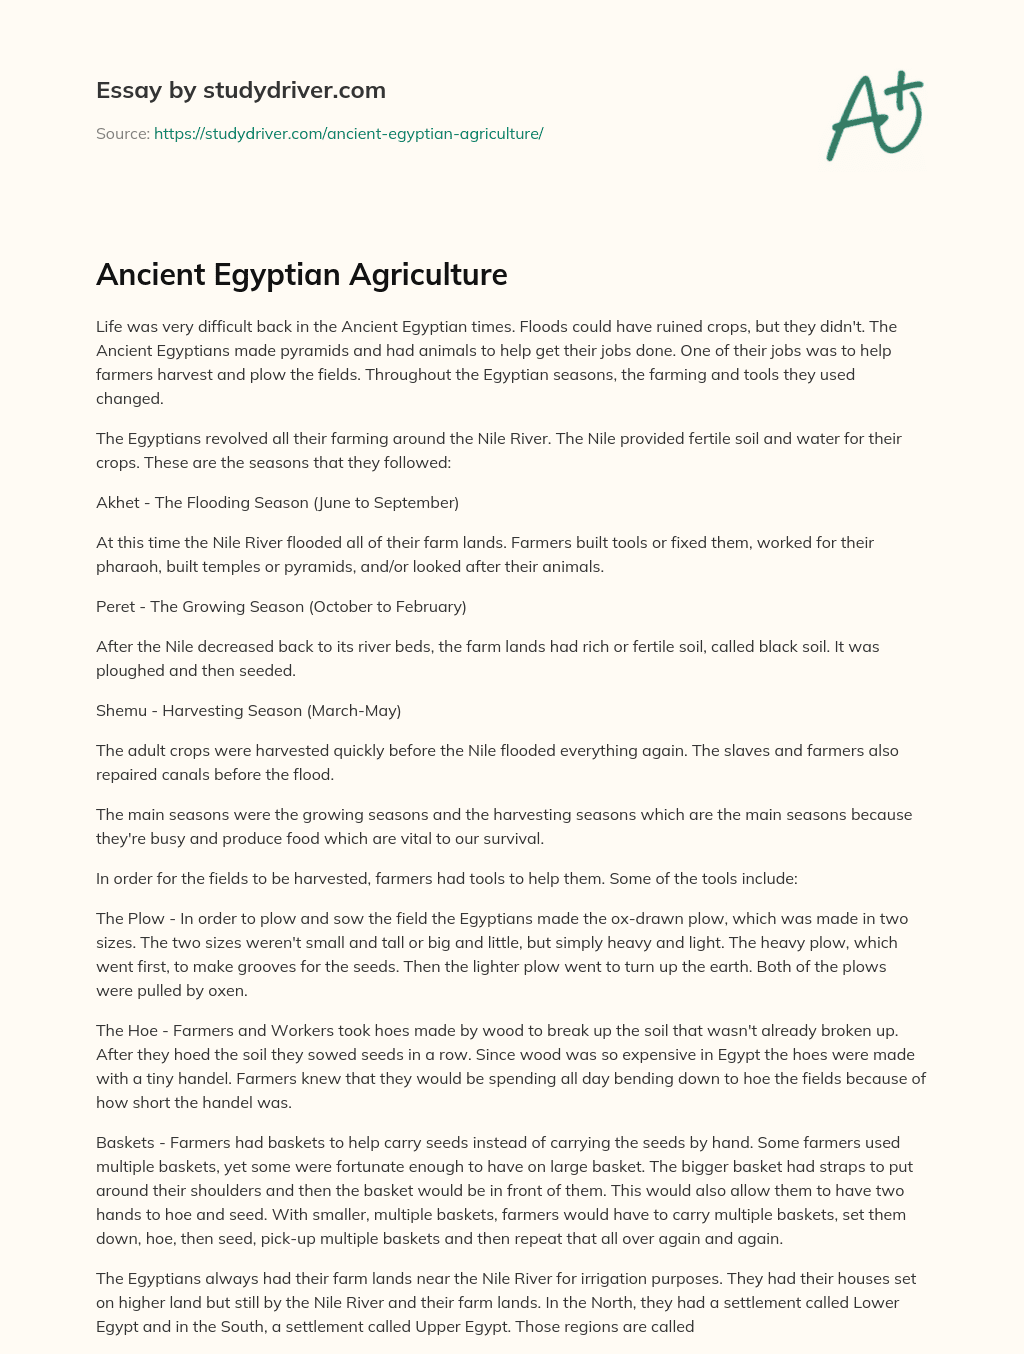 Ancient Egyptian Agriculture essay